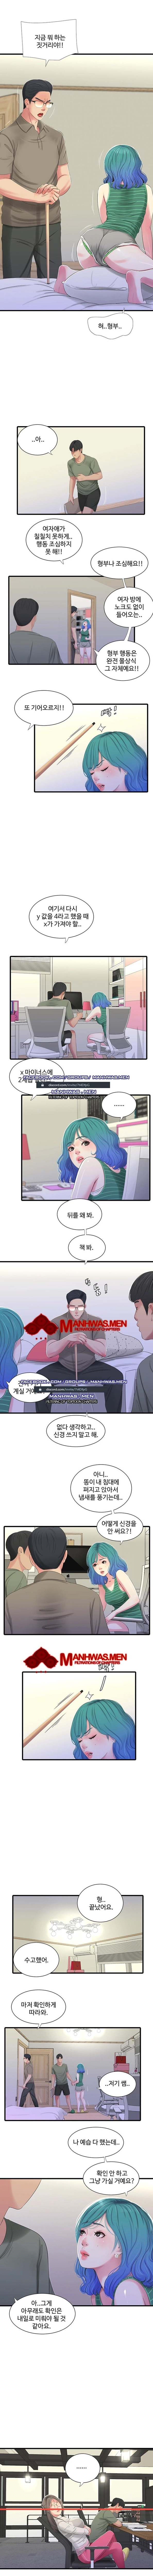 maidens-in-law-raw-chap-30-3